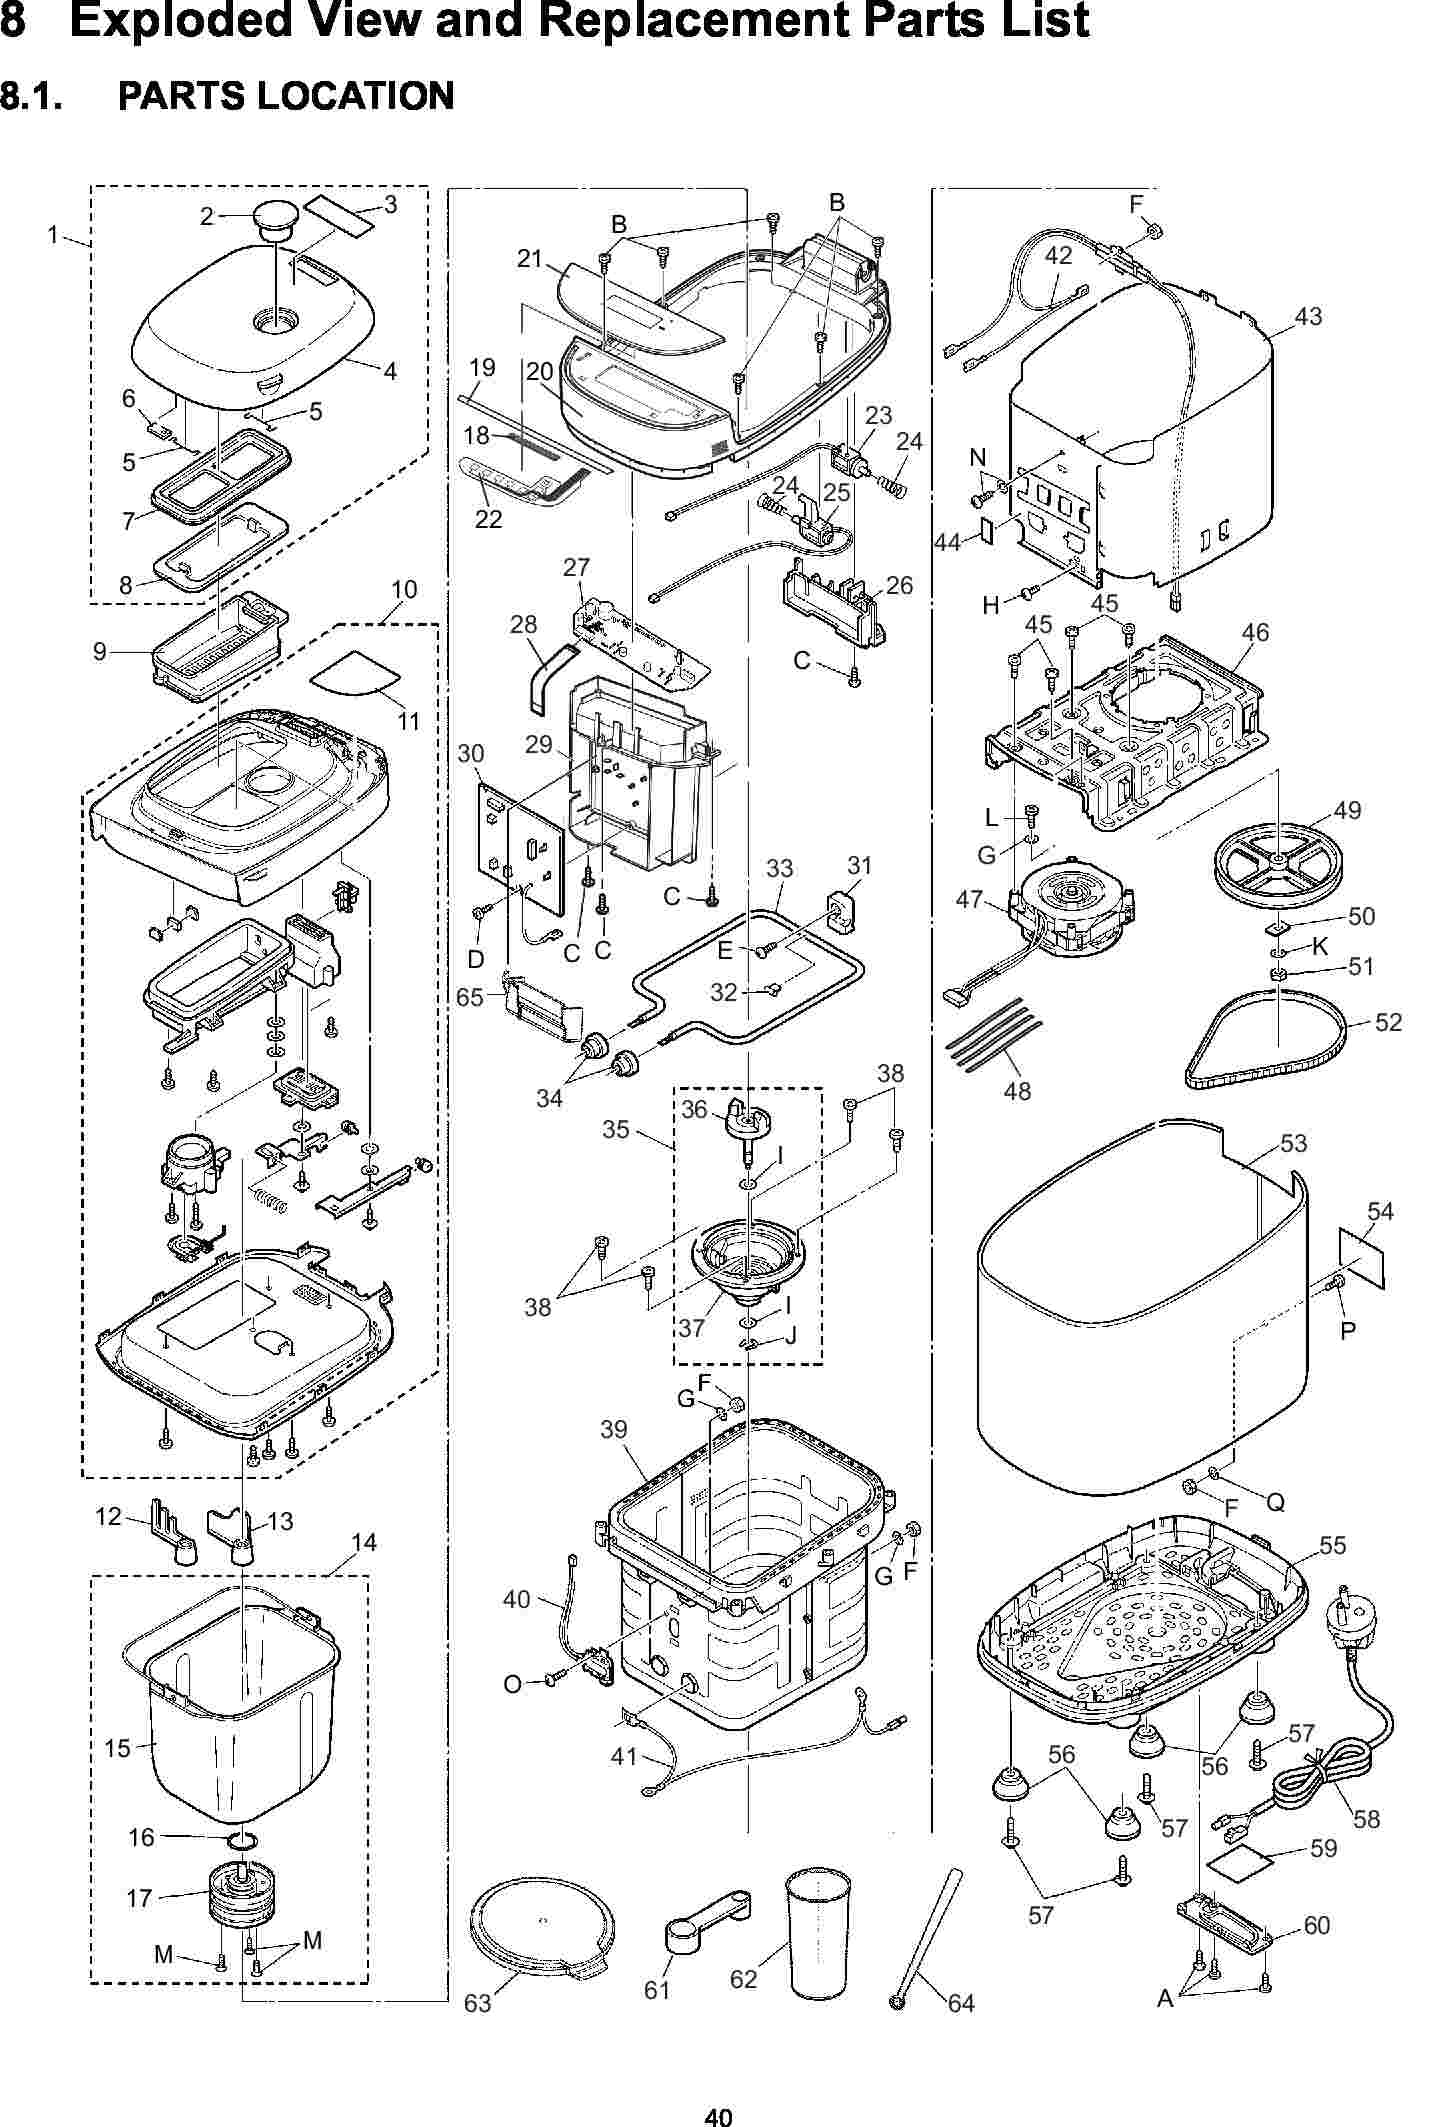 SD-ZX2522: Exploded View